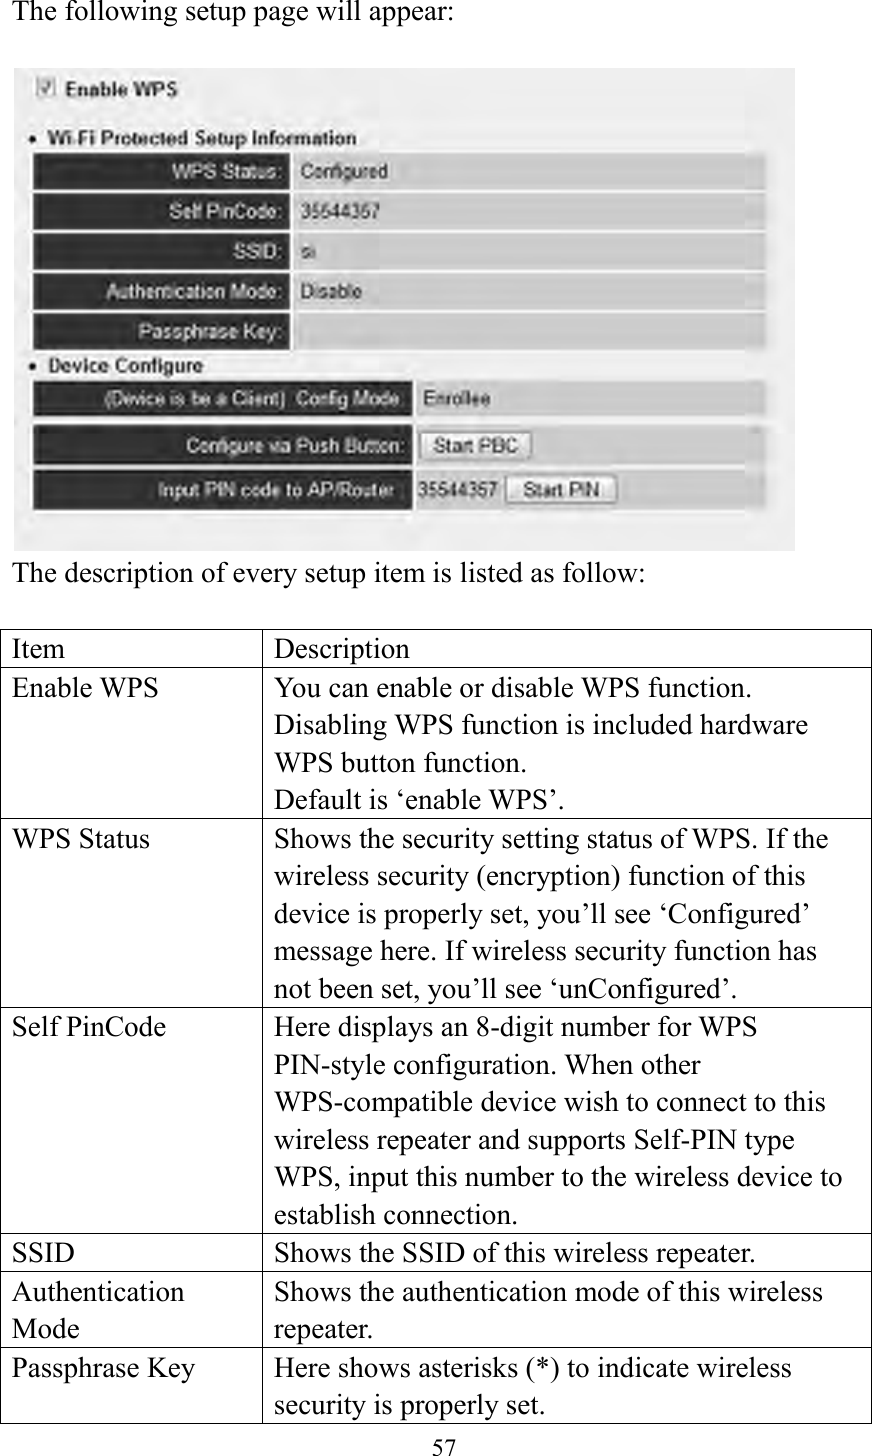  57  The following setup page will appear:   The description of every setup item is listed as follow:  Item Description Enable WPS You can enable or disable WPS function. Disabling WPS function is included hardware WPS button function.   Default is ‘enable WPS’.   WPS Status Shows the security setting status of WPS. If the wireless security (encryption) function of this device is properly set, you’ll see ‘Configured’ message here. If wireless security function has not been set, you’ll see ‘unConfigured’. Self PinCode Here displays an 8-digit number for WPS PIN-style configuration. When other WPS-compatible device wish to connect to this wireless repeater and supports Self-PIN type WPS, input this number to the wireless device to establish connection. SSID Shows the SSID of this wireless repeater. Authentication Mode Shows the authentication mode of this wireless repeater. Passphrase Key Here shows asterisks (*) to indicate wireless security is properly set. 